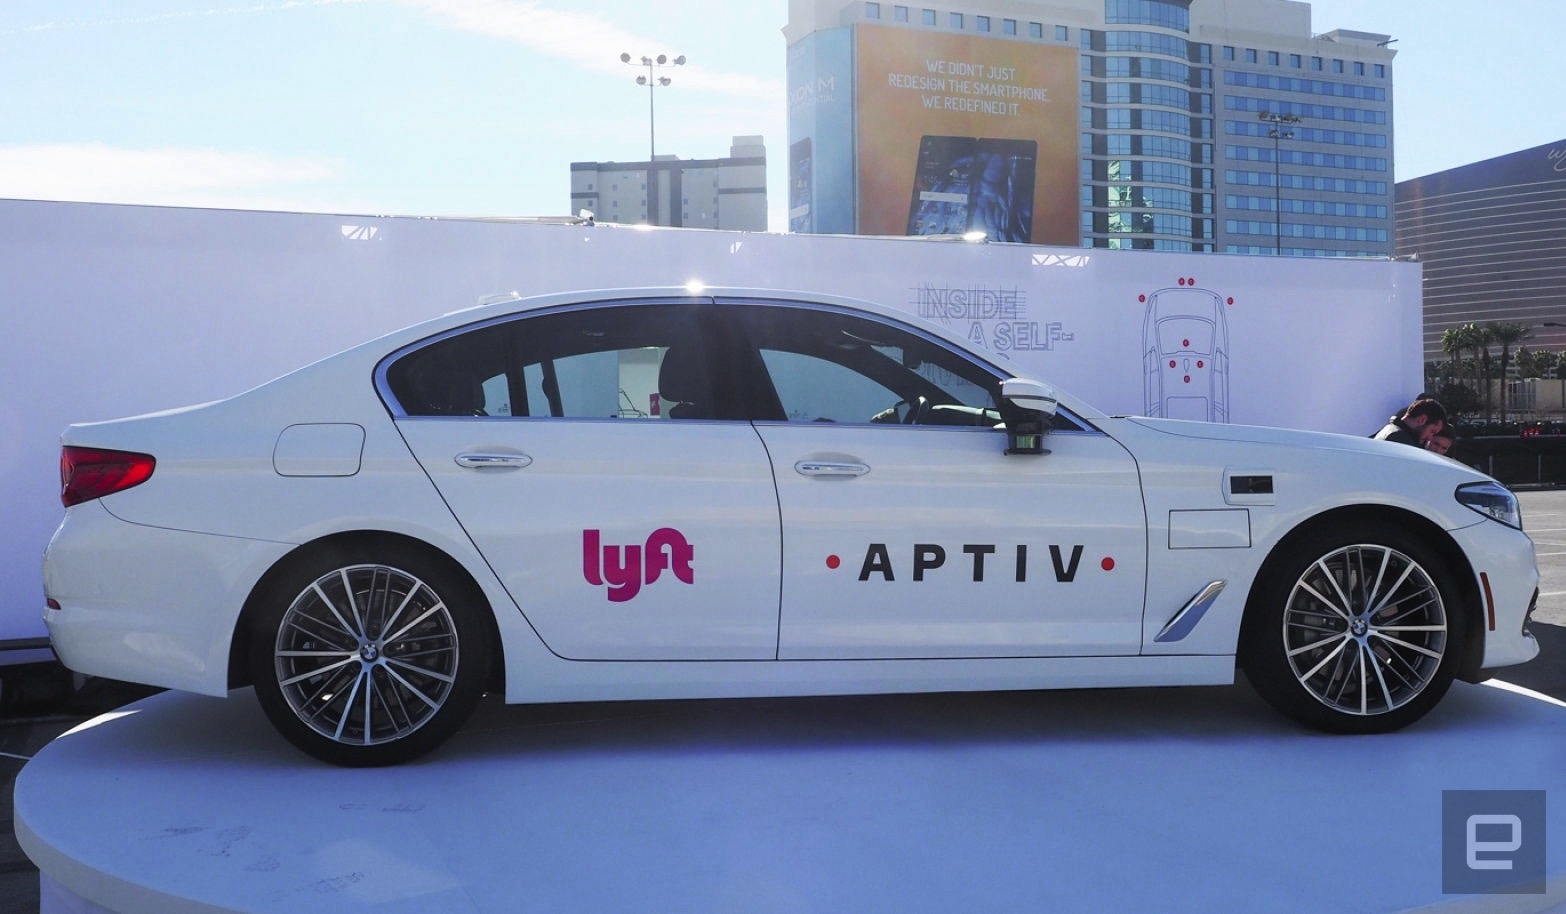 Lyft and Aptiv will partner on self-driving cars beyond CES | DeviceDaily.com